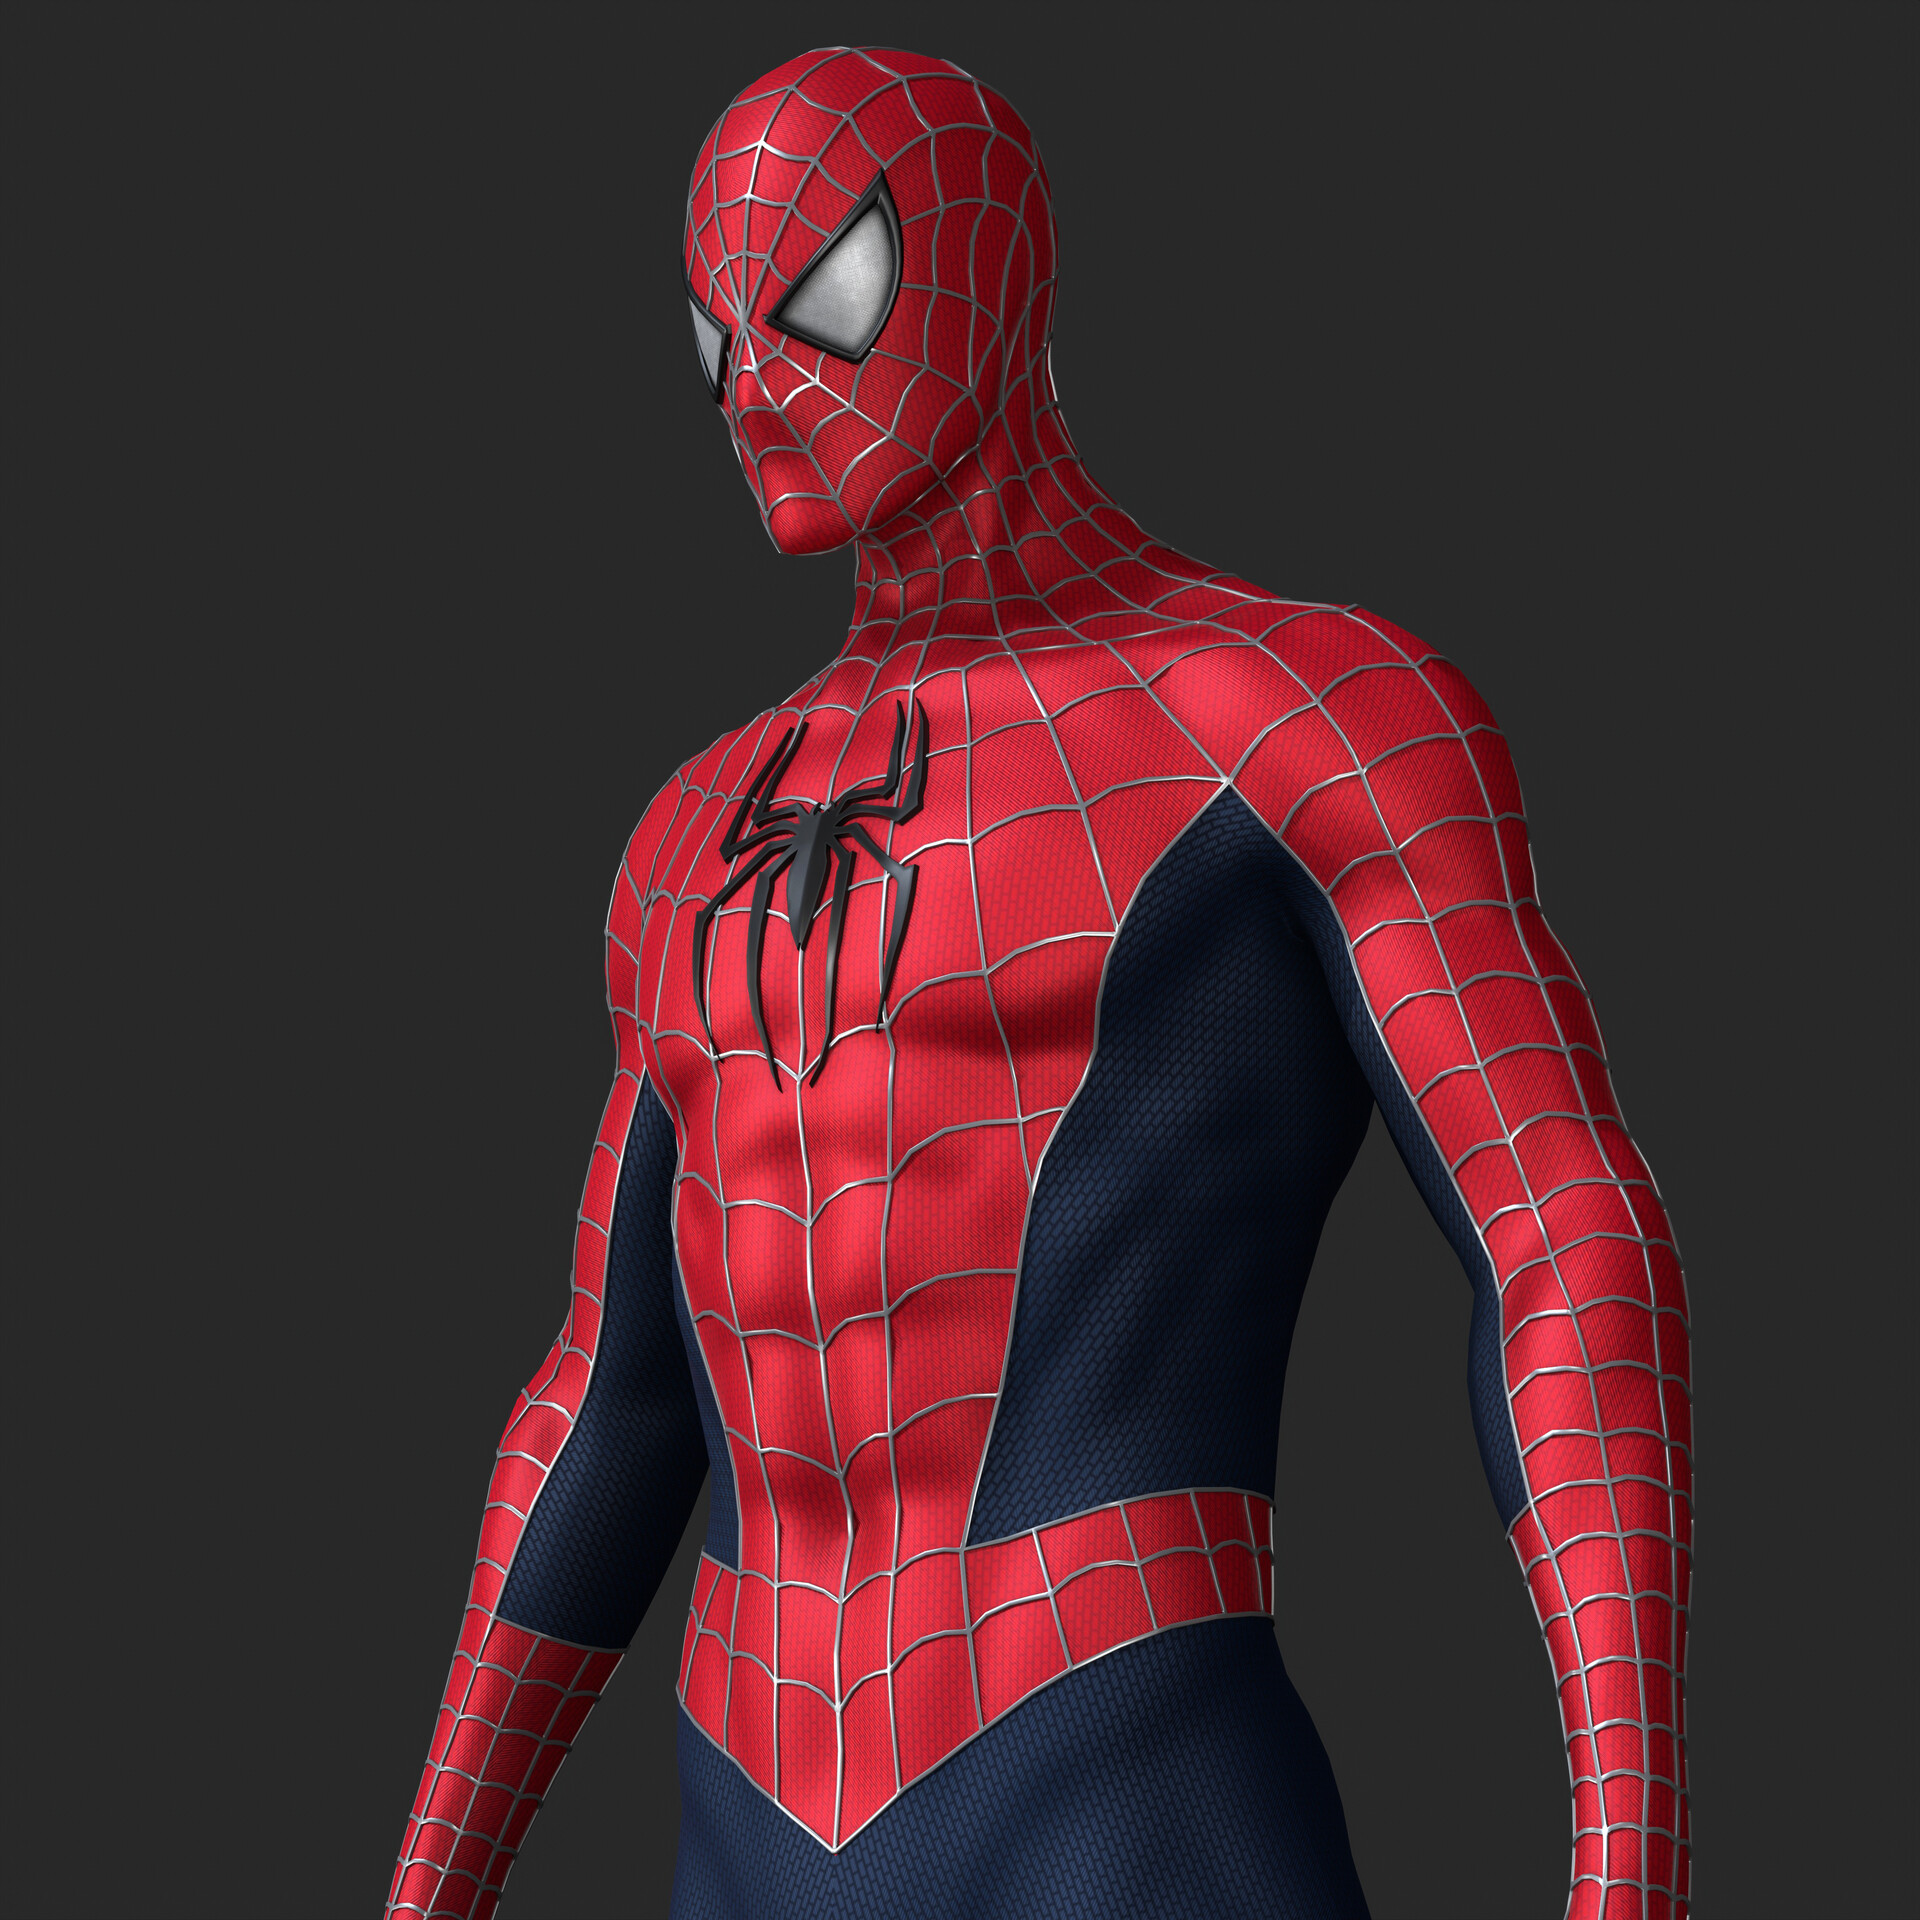 3D model The Amazing Spider-man 2 3D MODEL Low-poly VR / AR / low-poly